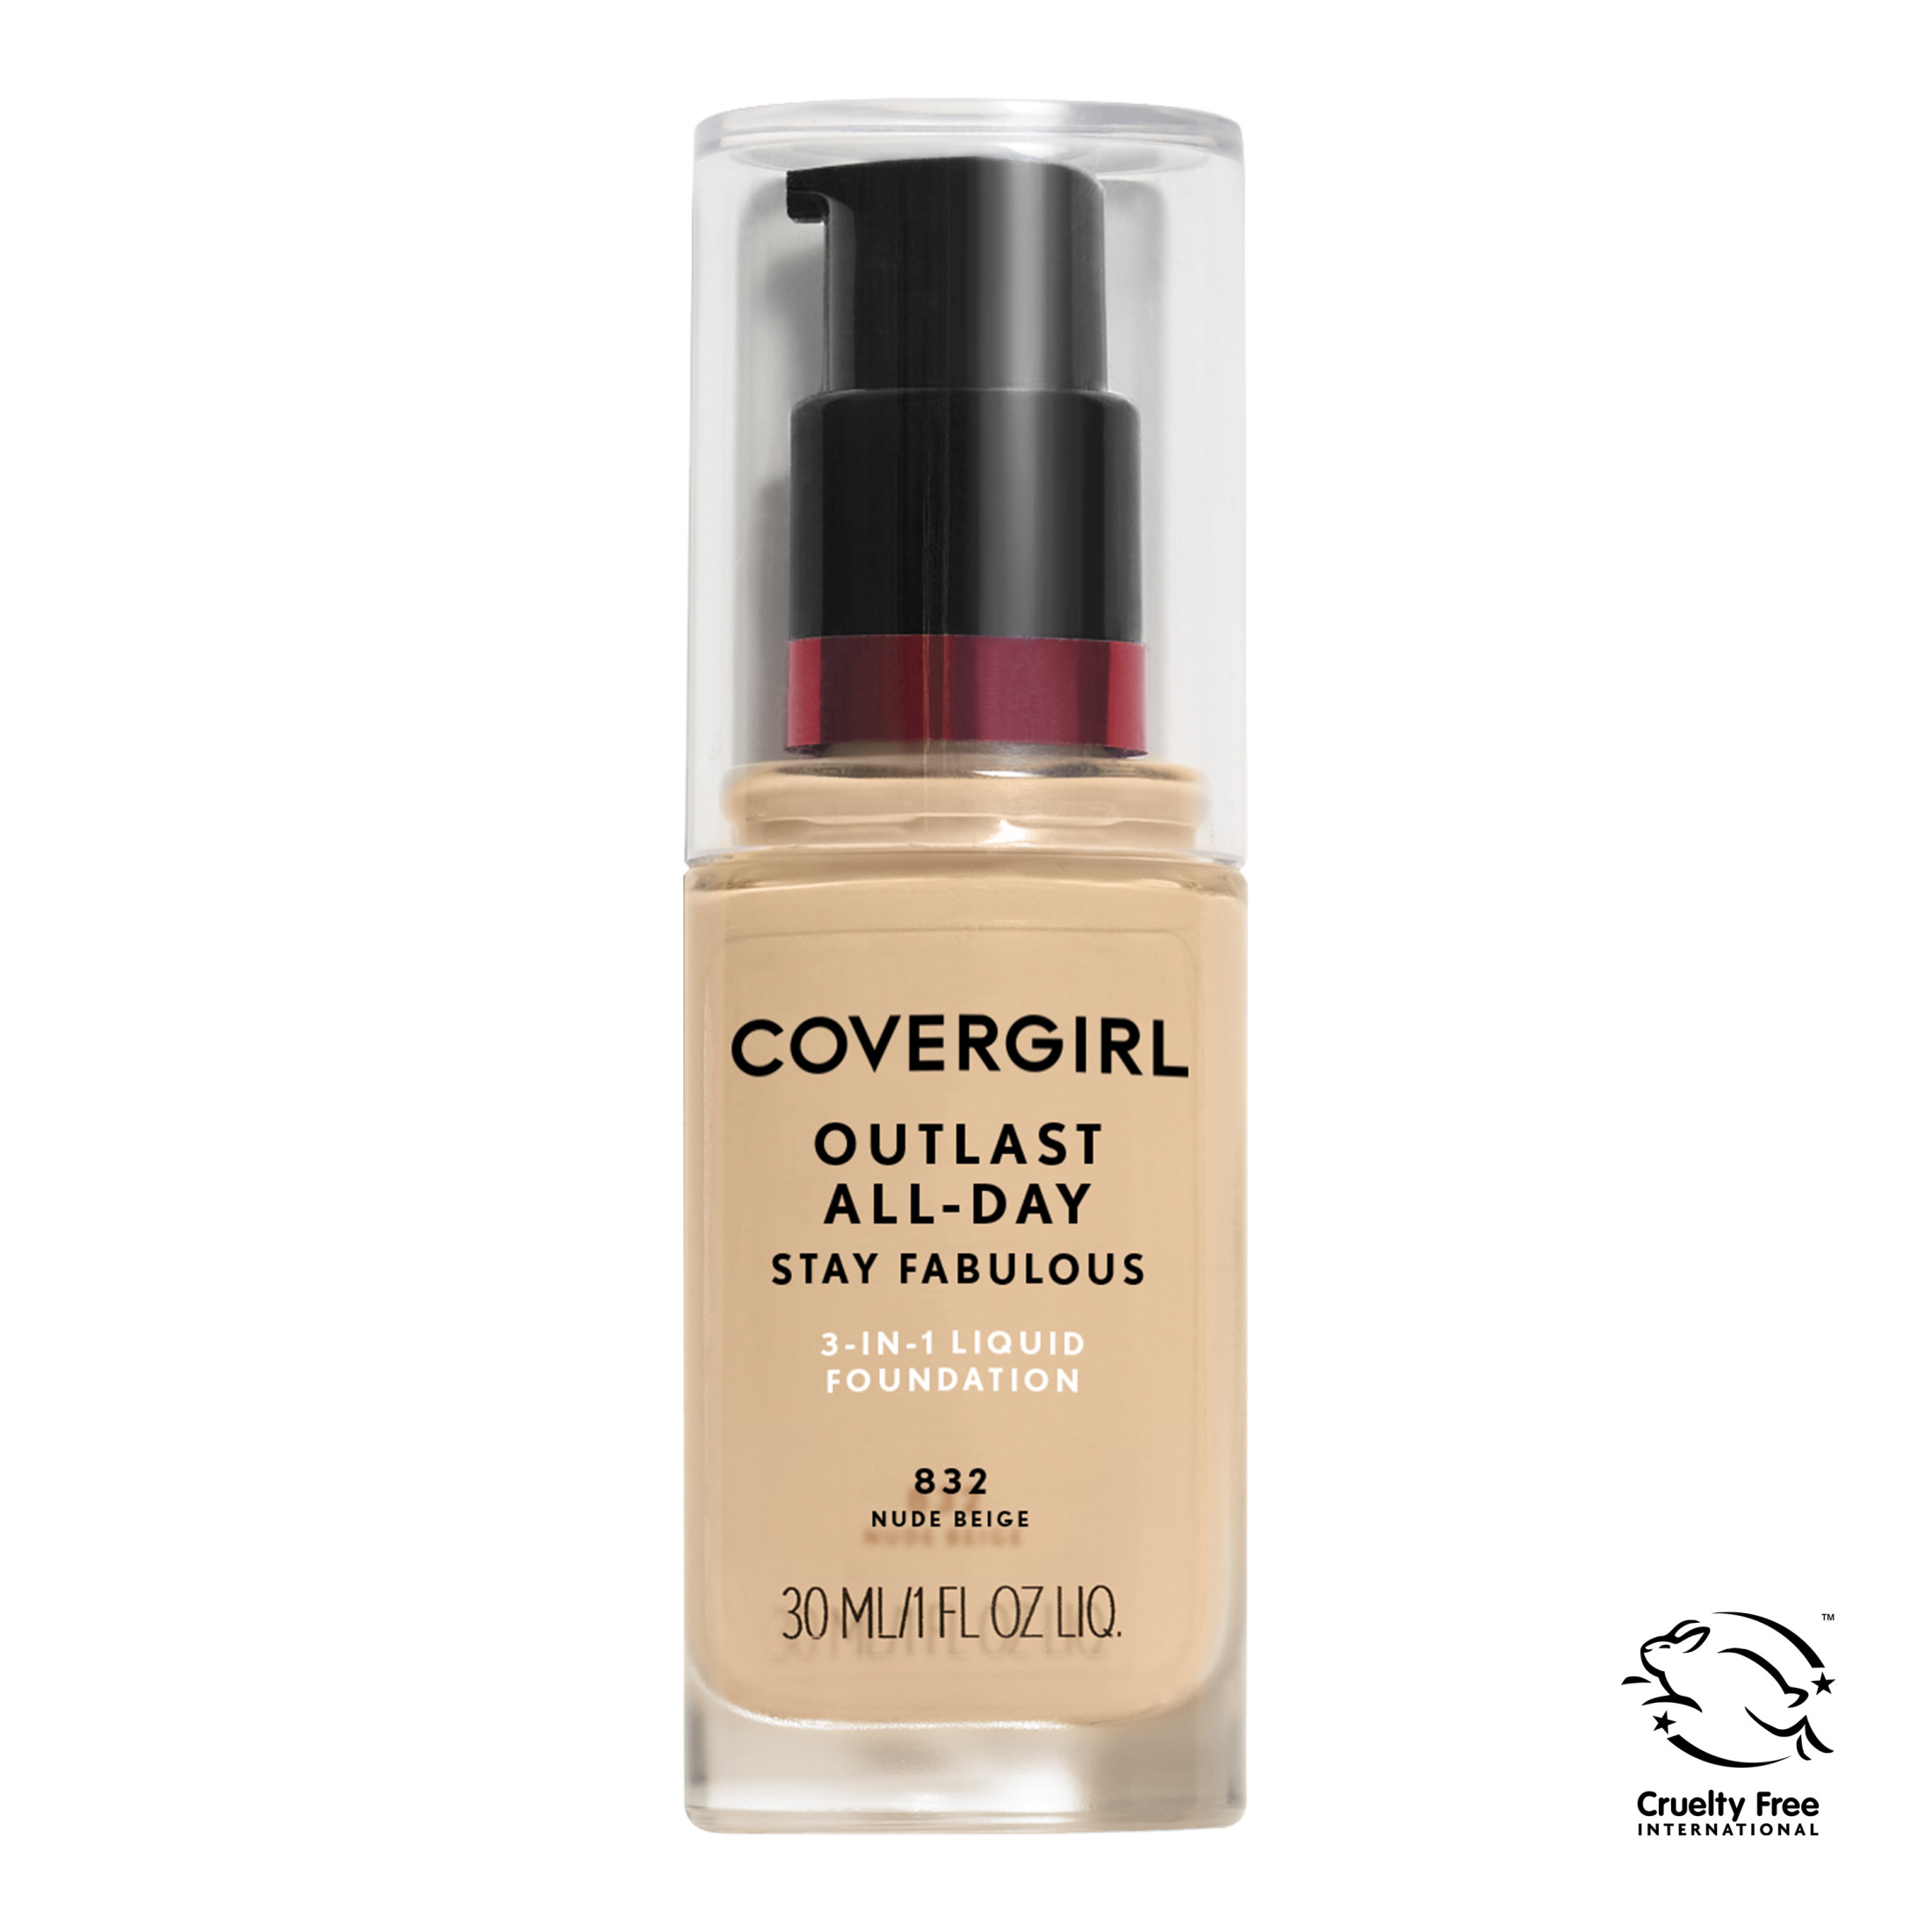 COVERGIRL Outlast All-Day Stay Fabulous 3-in-1 Foundation, 860 Classic Tan, 1 oz - image 1 of 6